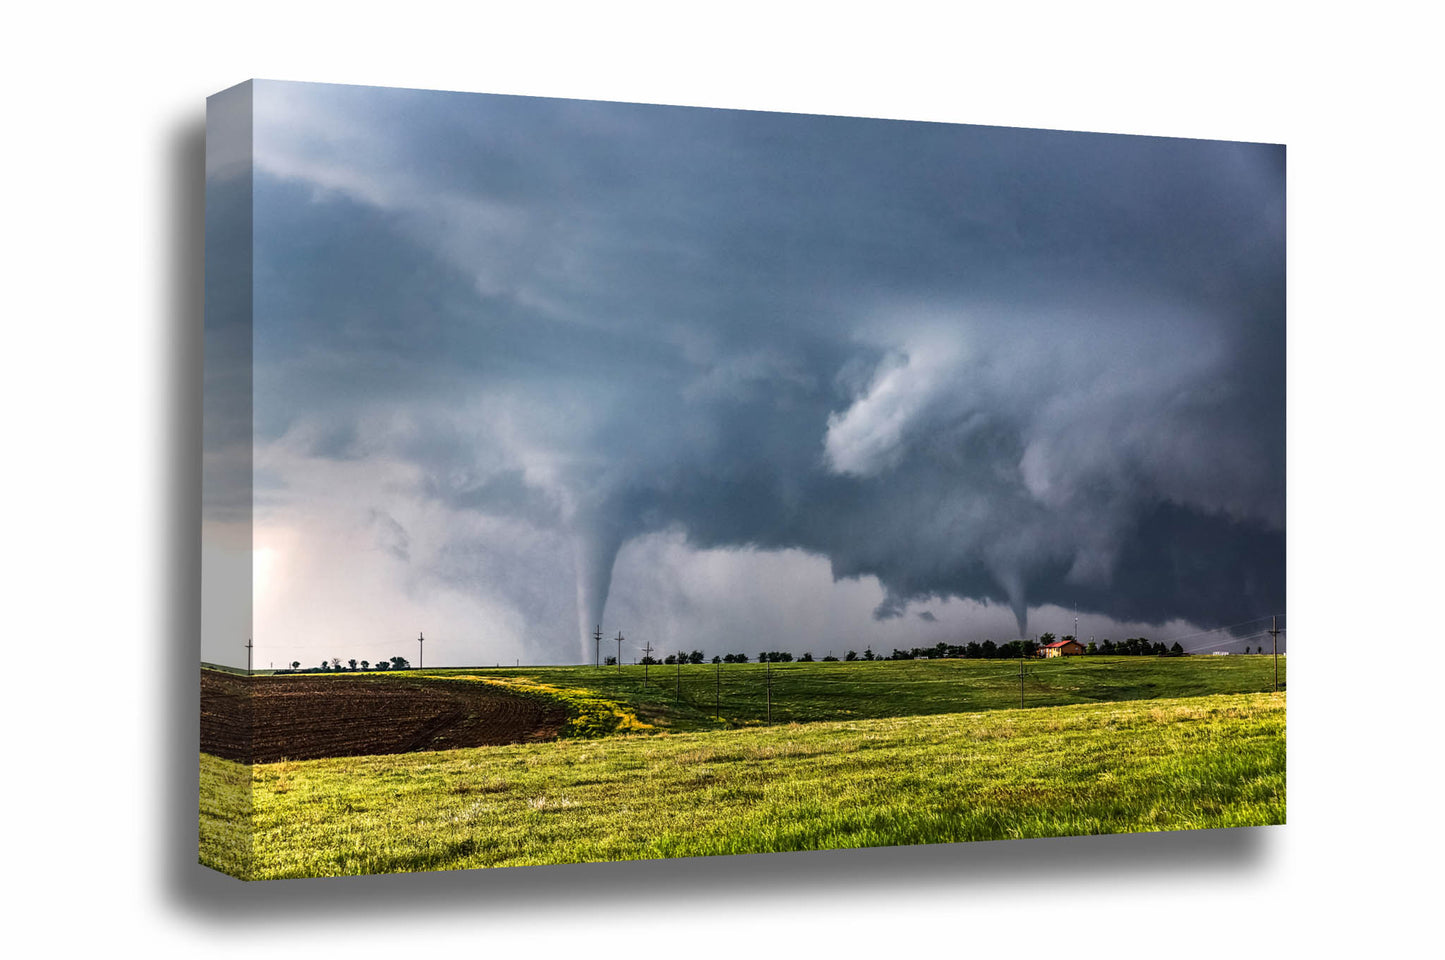 Storm canvas wall art of two tornadoes touching down at the same time on a stormy spring day near Dodge City, Kansas by Sean Ramsey of Southern Plains Photography.